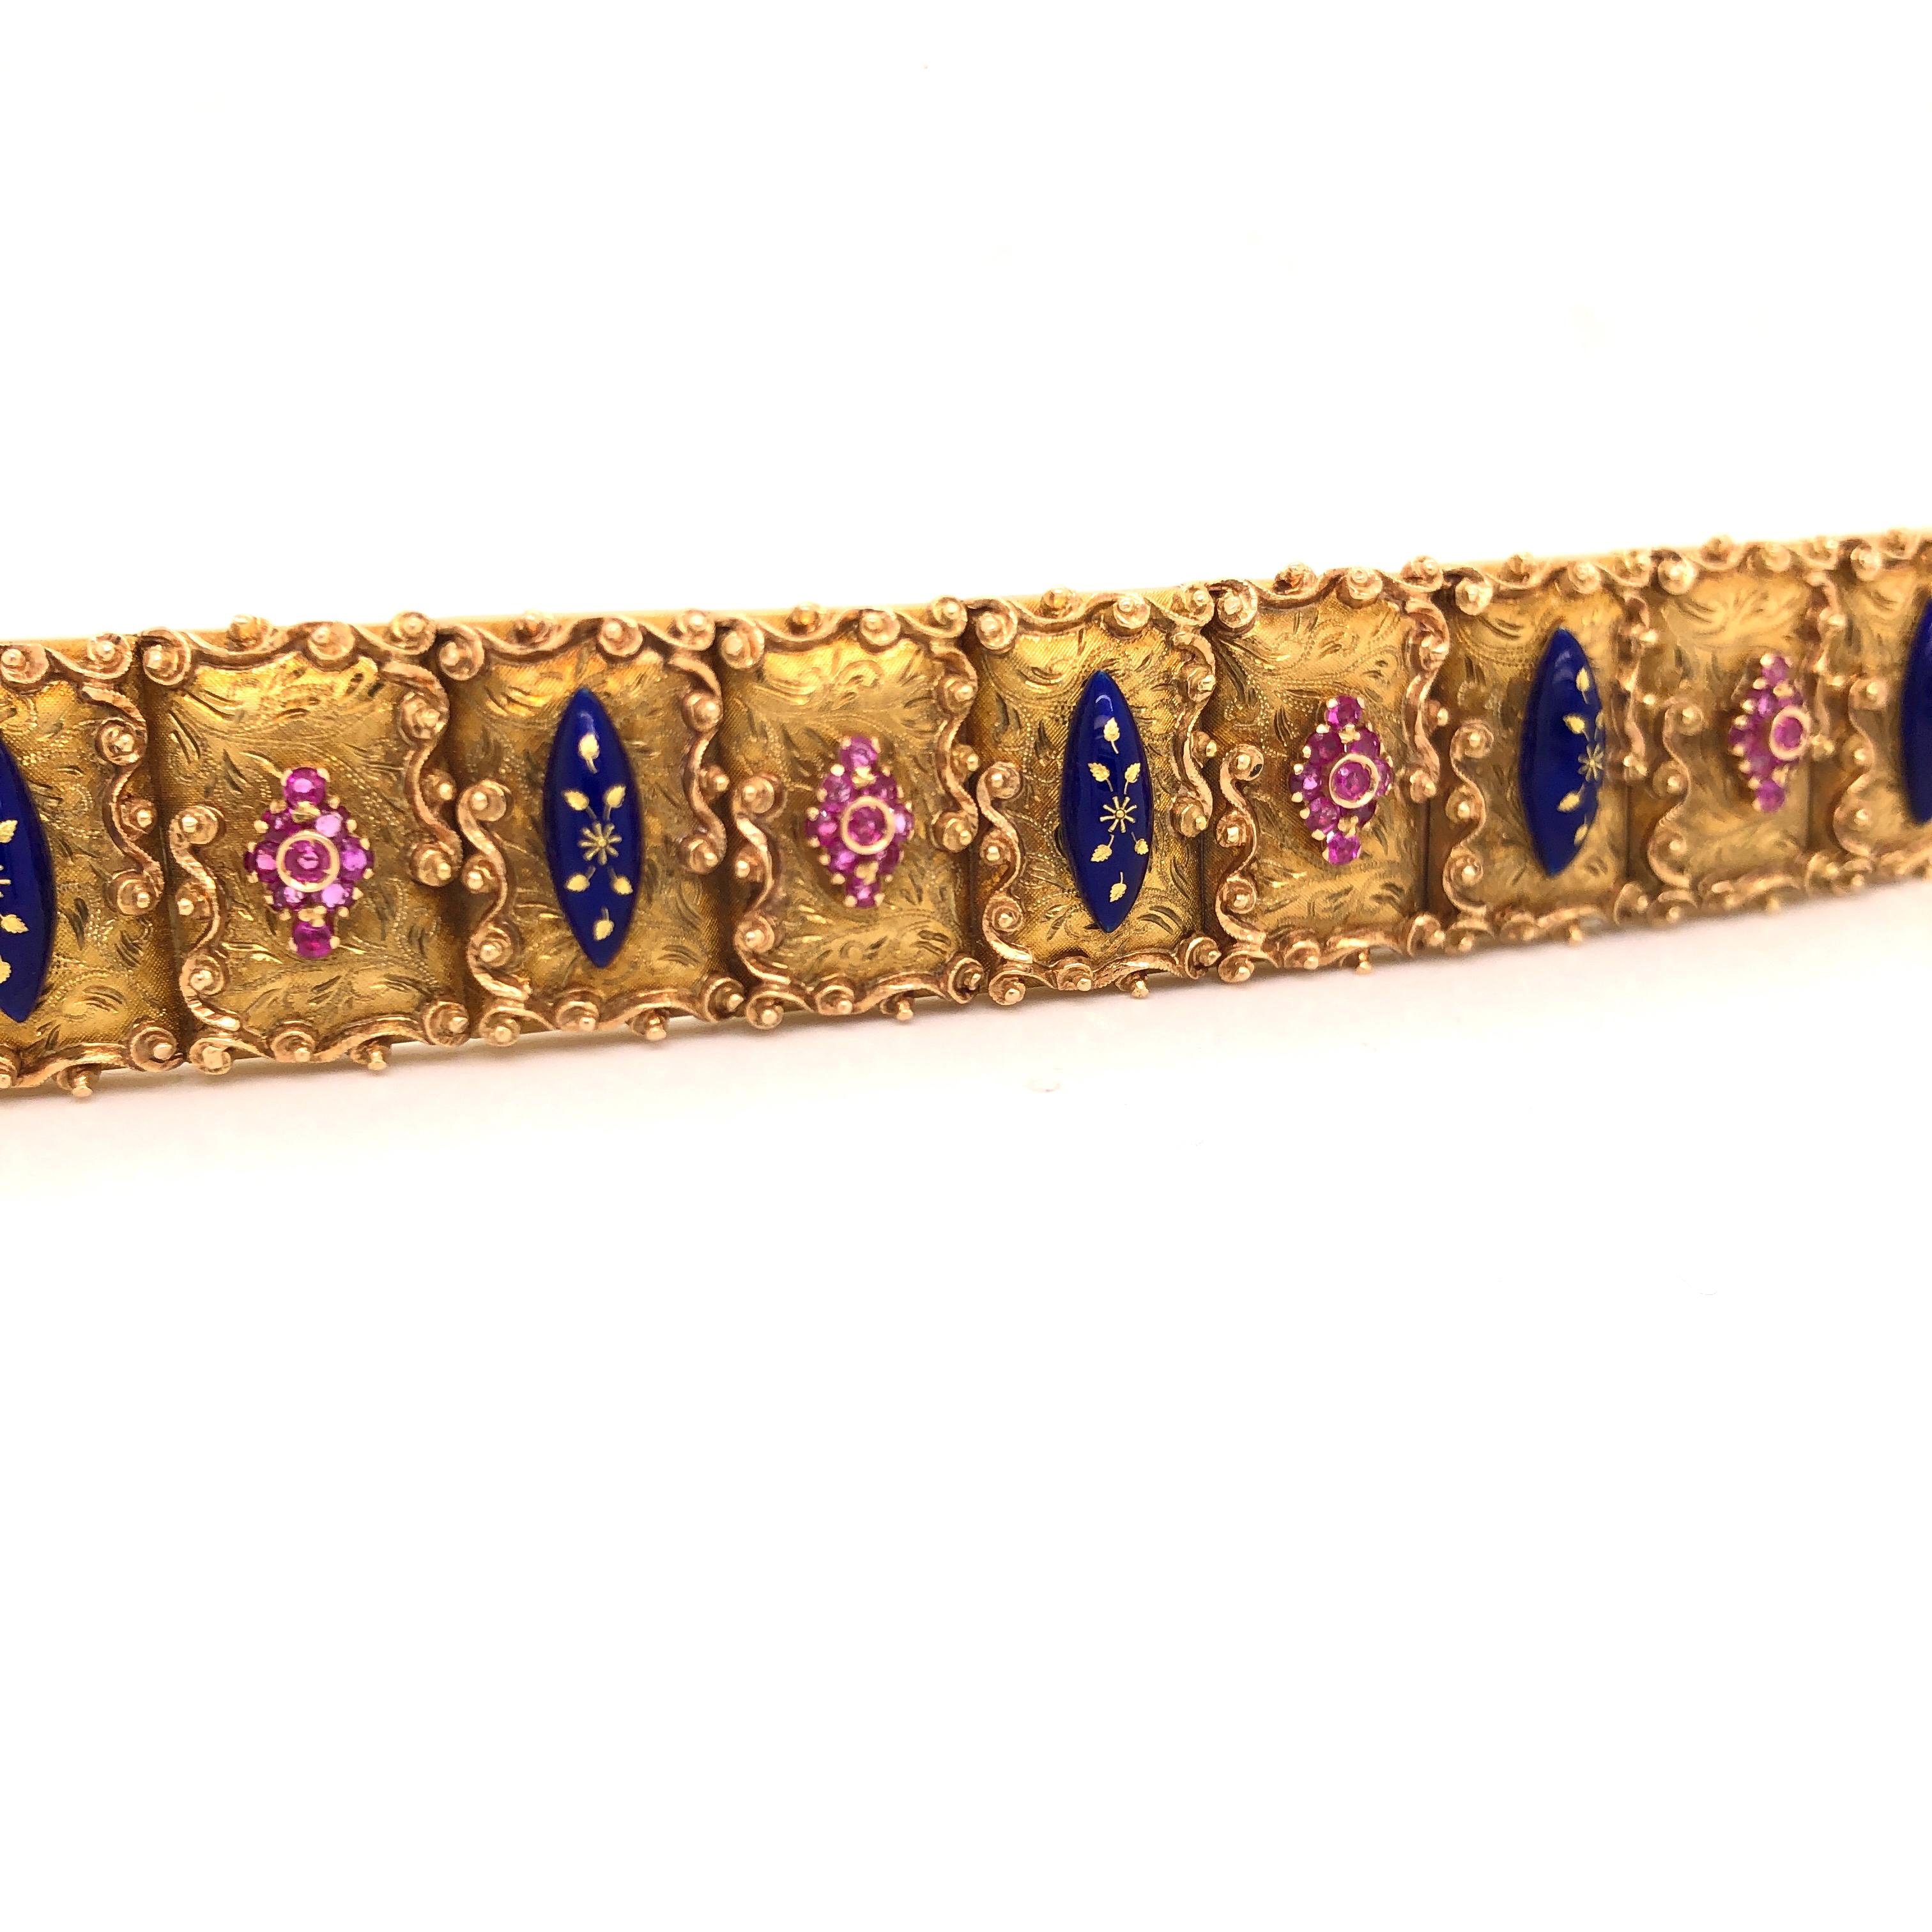 Equisite detail is seen in this beautiful 18k yellow gold bracelet. The bracelet weighs 73.5 grams and is hallmarked with Italian made stamps. This wide ladies bracelet is decorated with rubies and enamel giving a contrast of color that pops off